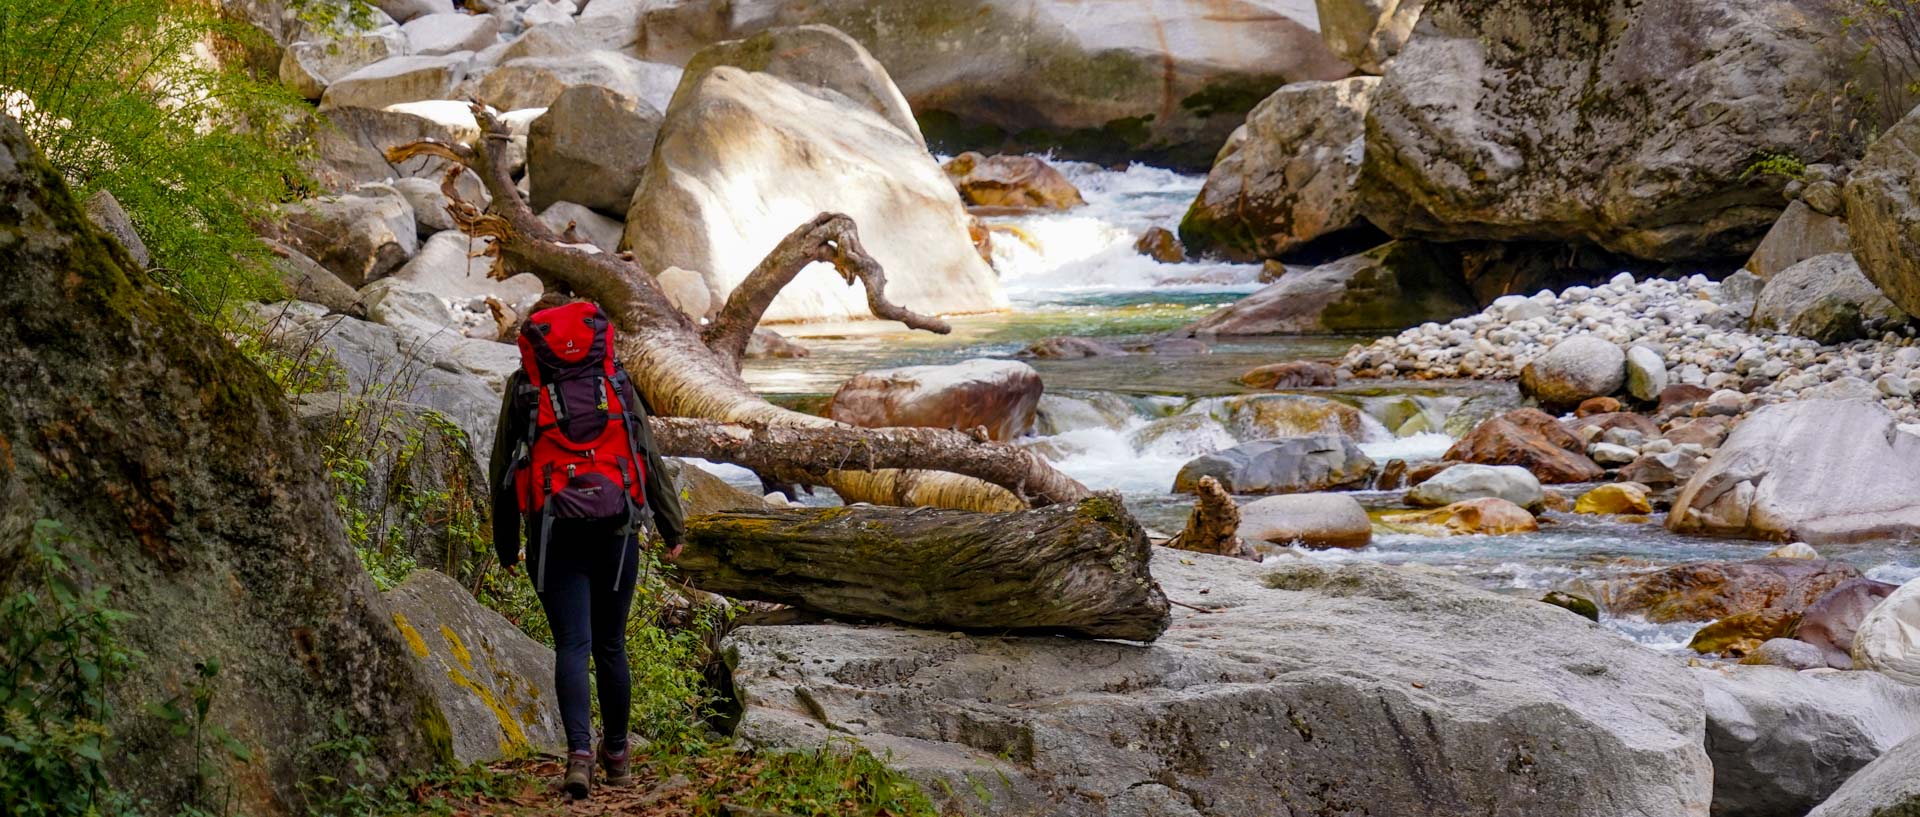 trekking in the Great Himalayan National Park